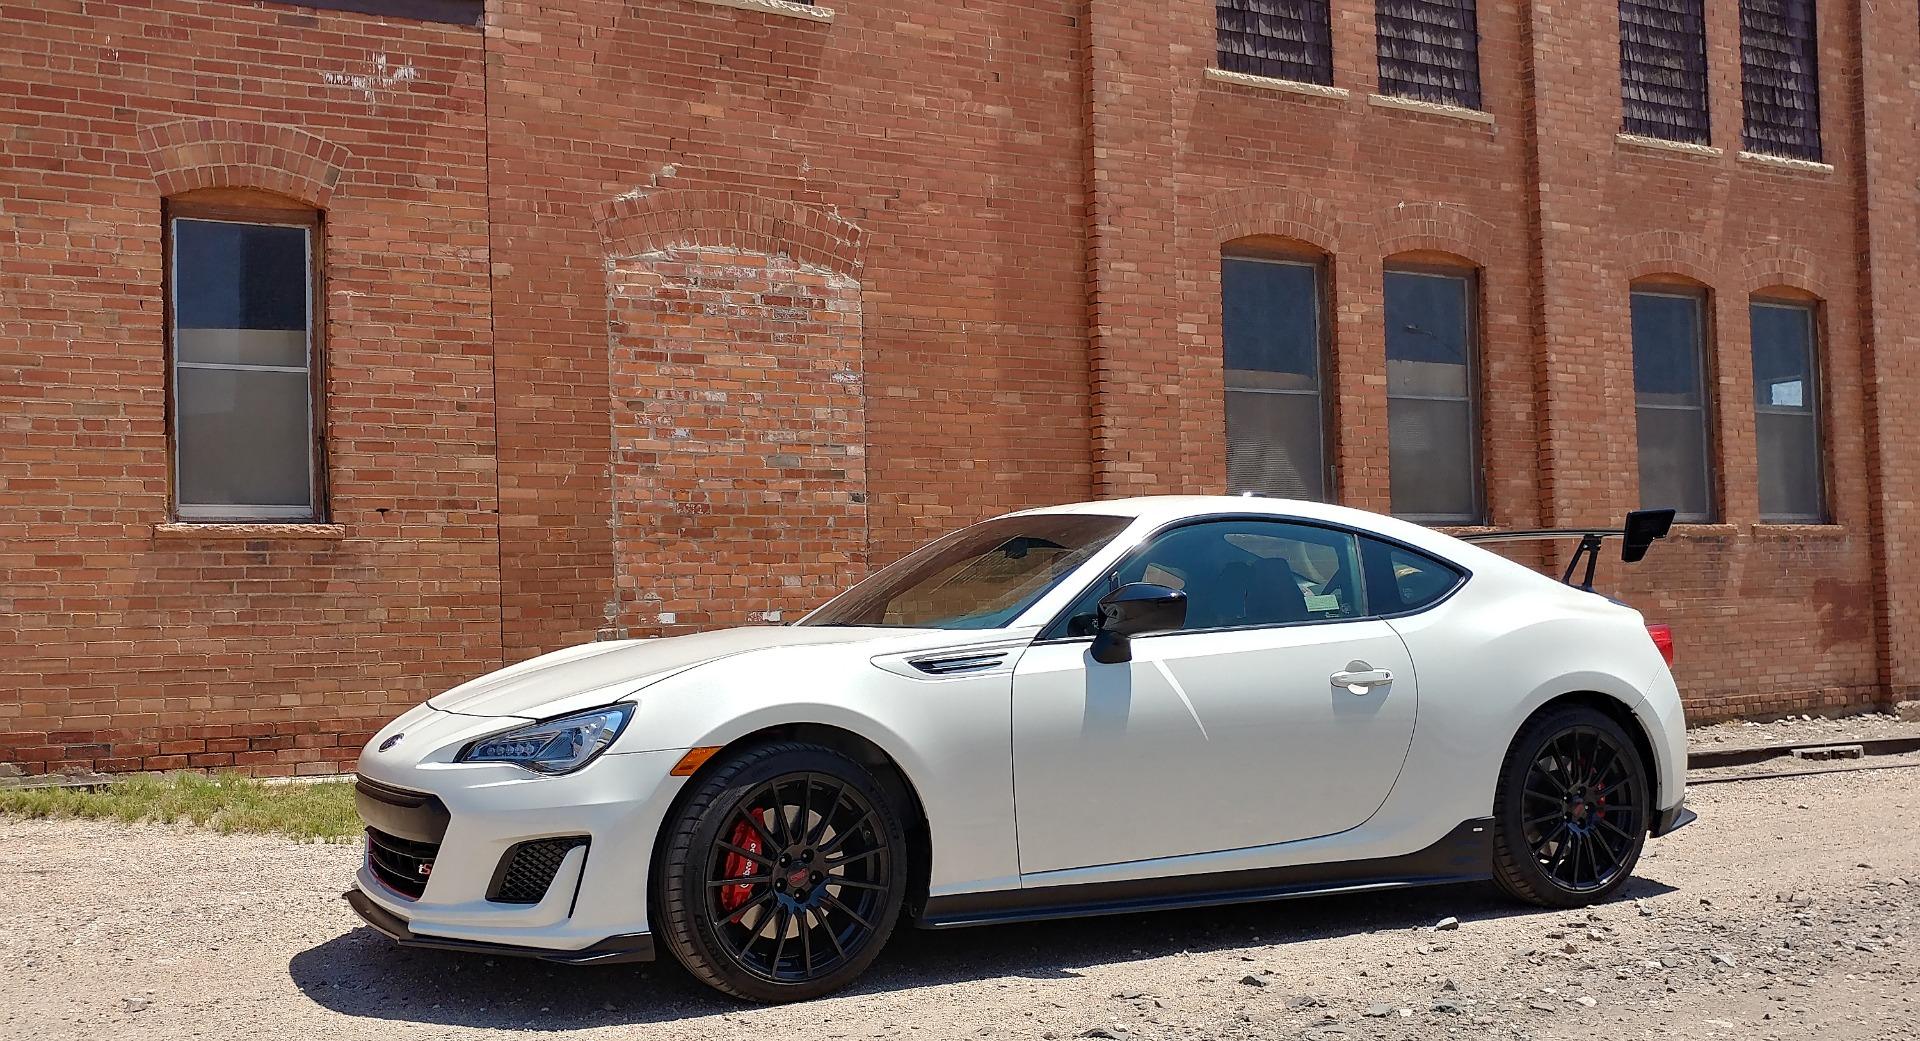 Review: The 2018 Subaru BRZ tS that comes in 500 track-ready limited  editions